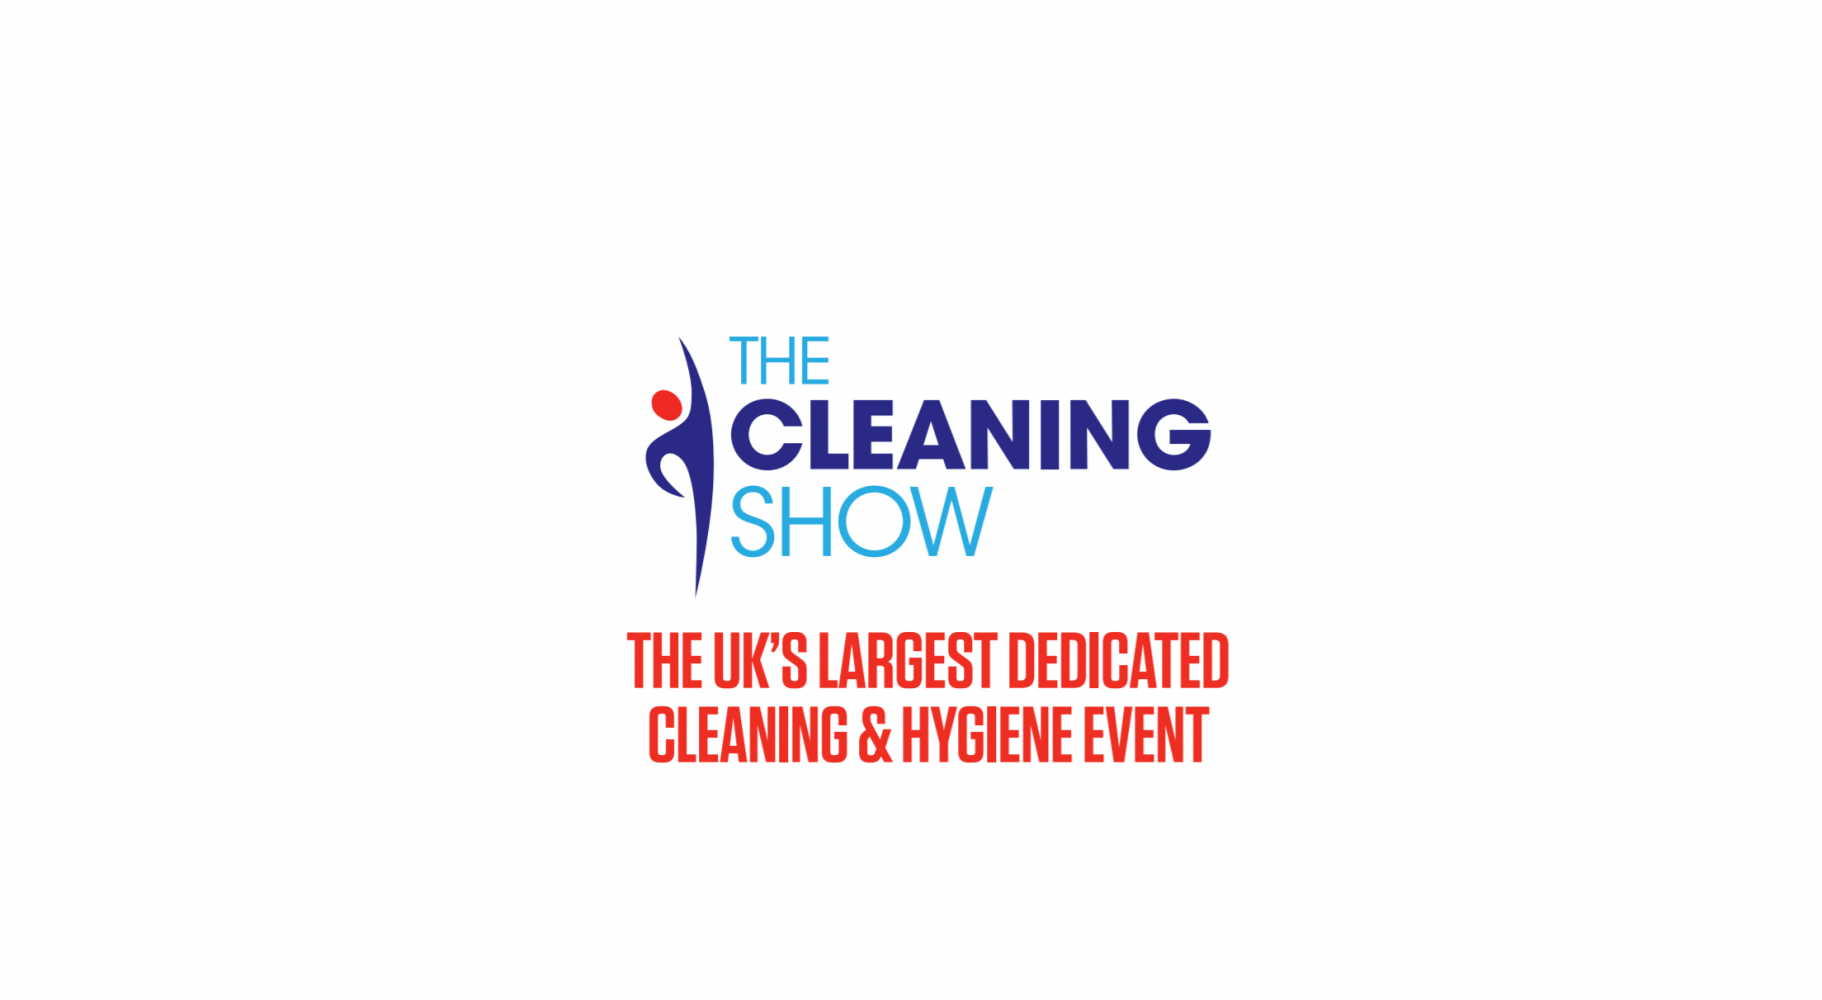 The Cleaning Show